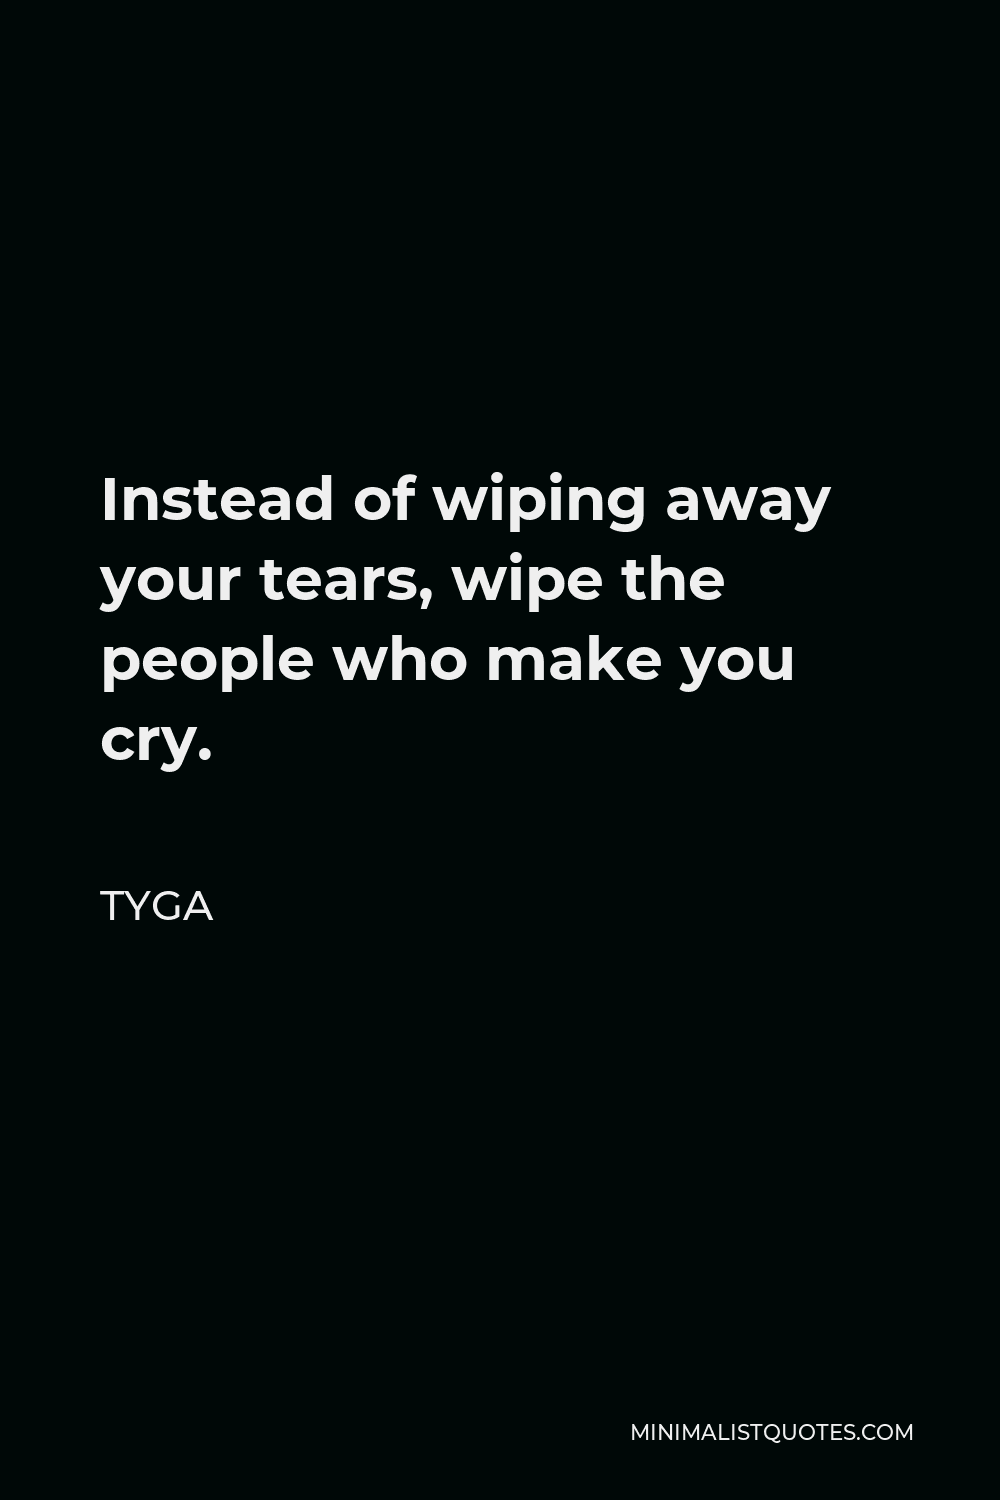 Tyga Quote - Instead of wiping away your tears, wipe the people who make you cry.